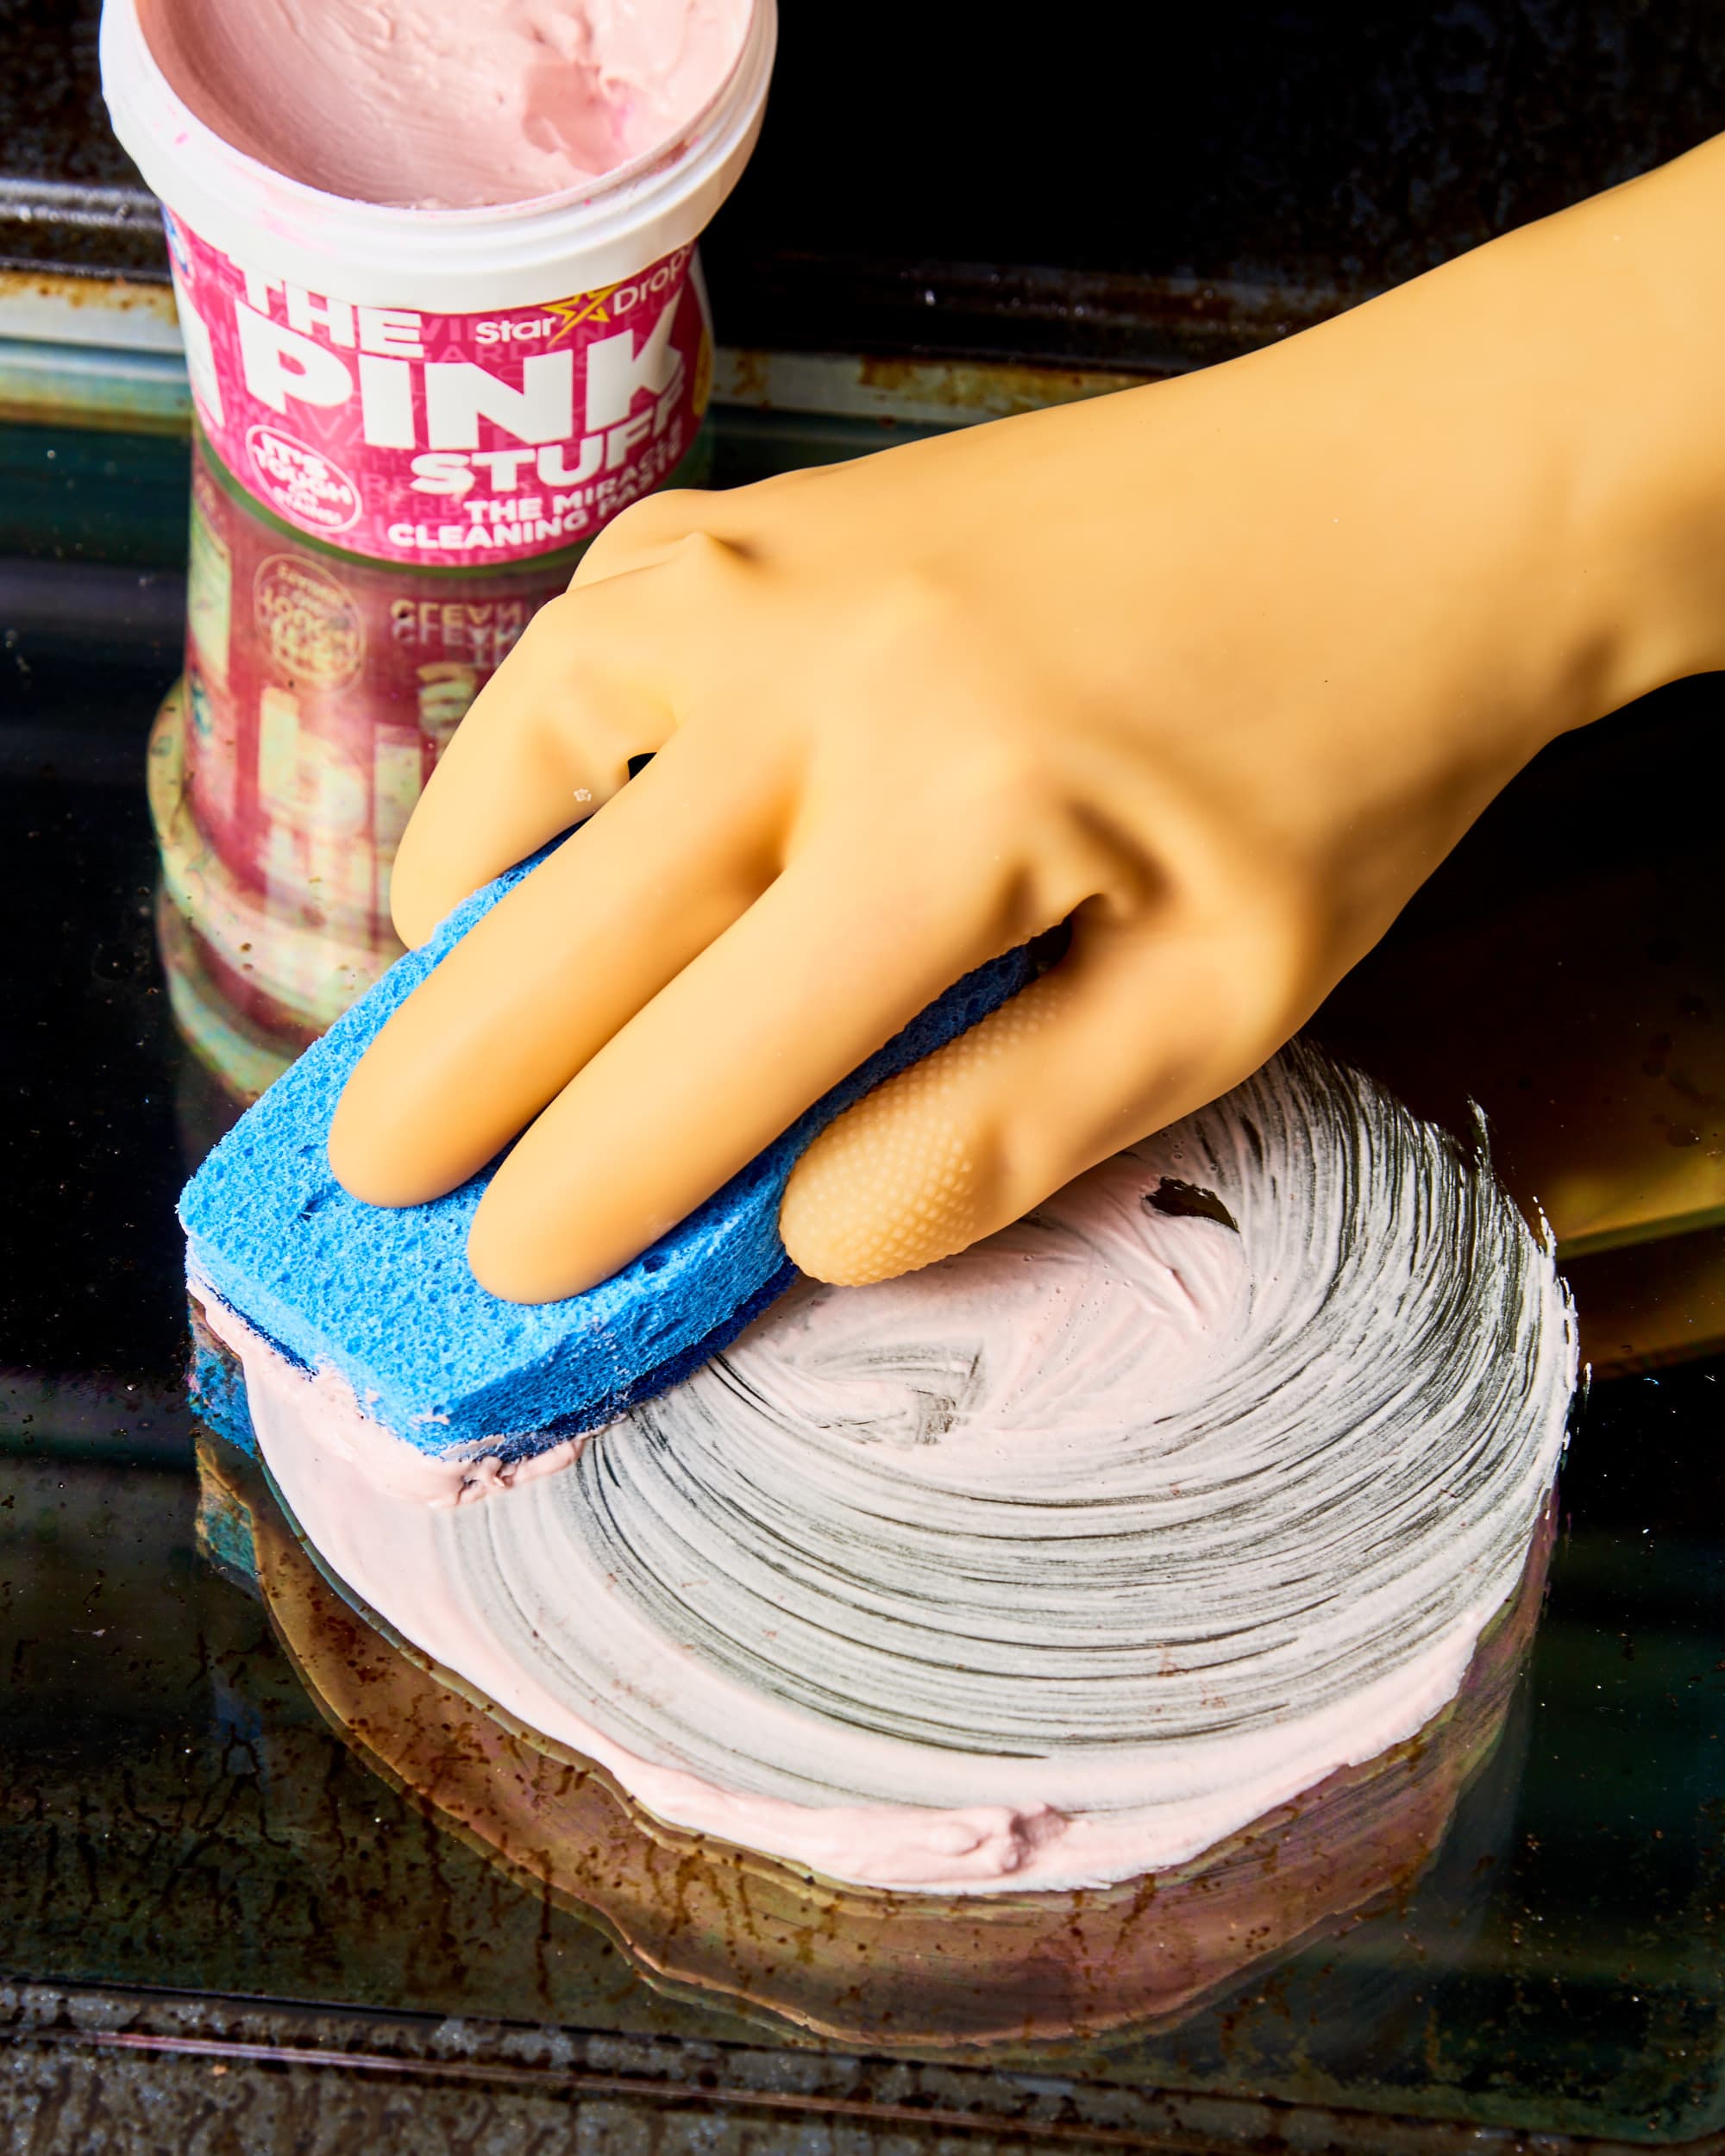 Cleaning the oven with the Pink Stuff paste! 🧼🫧 #ovendeepclean